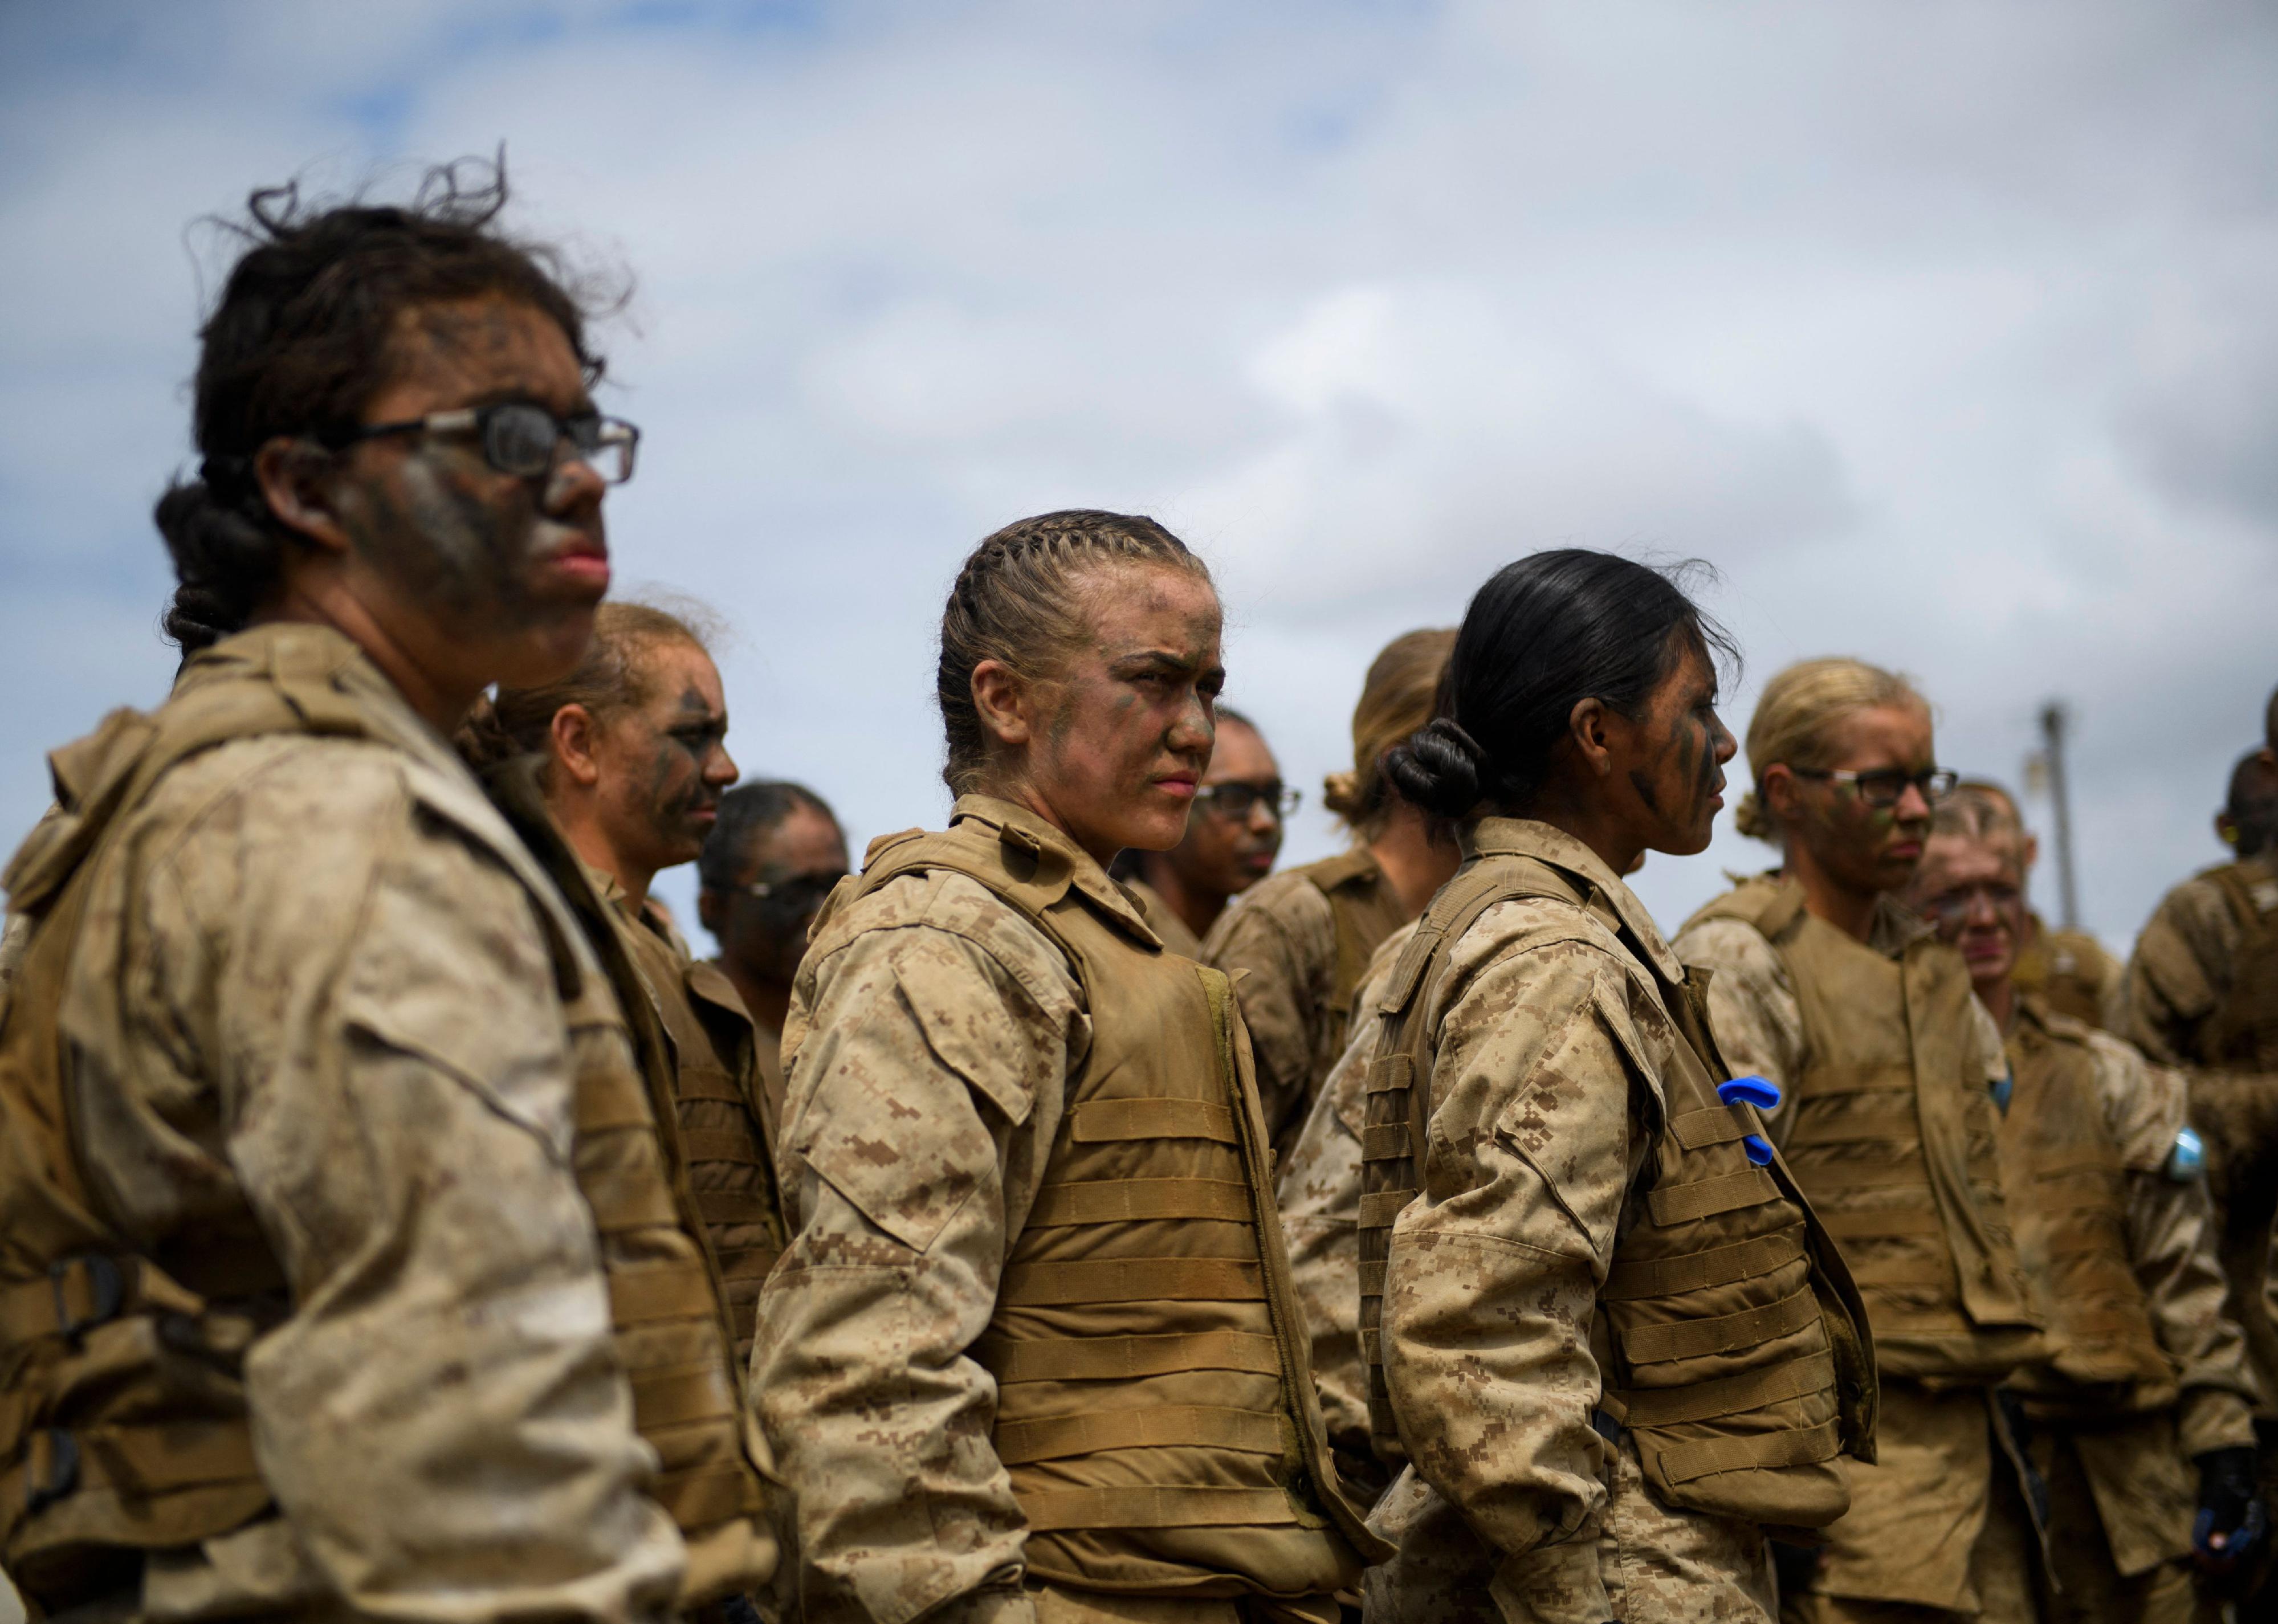 A group of women in tan camouflage military gear.